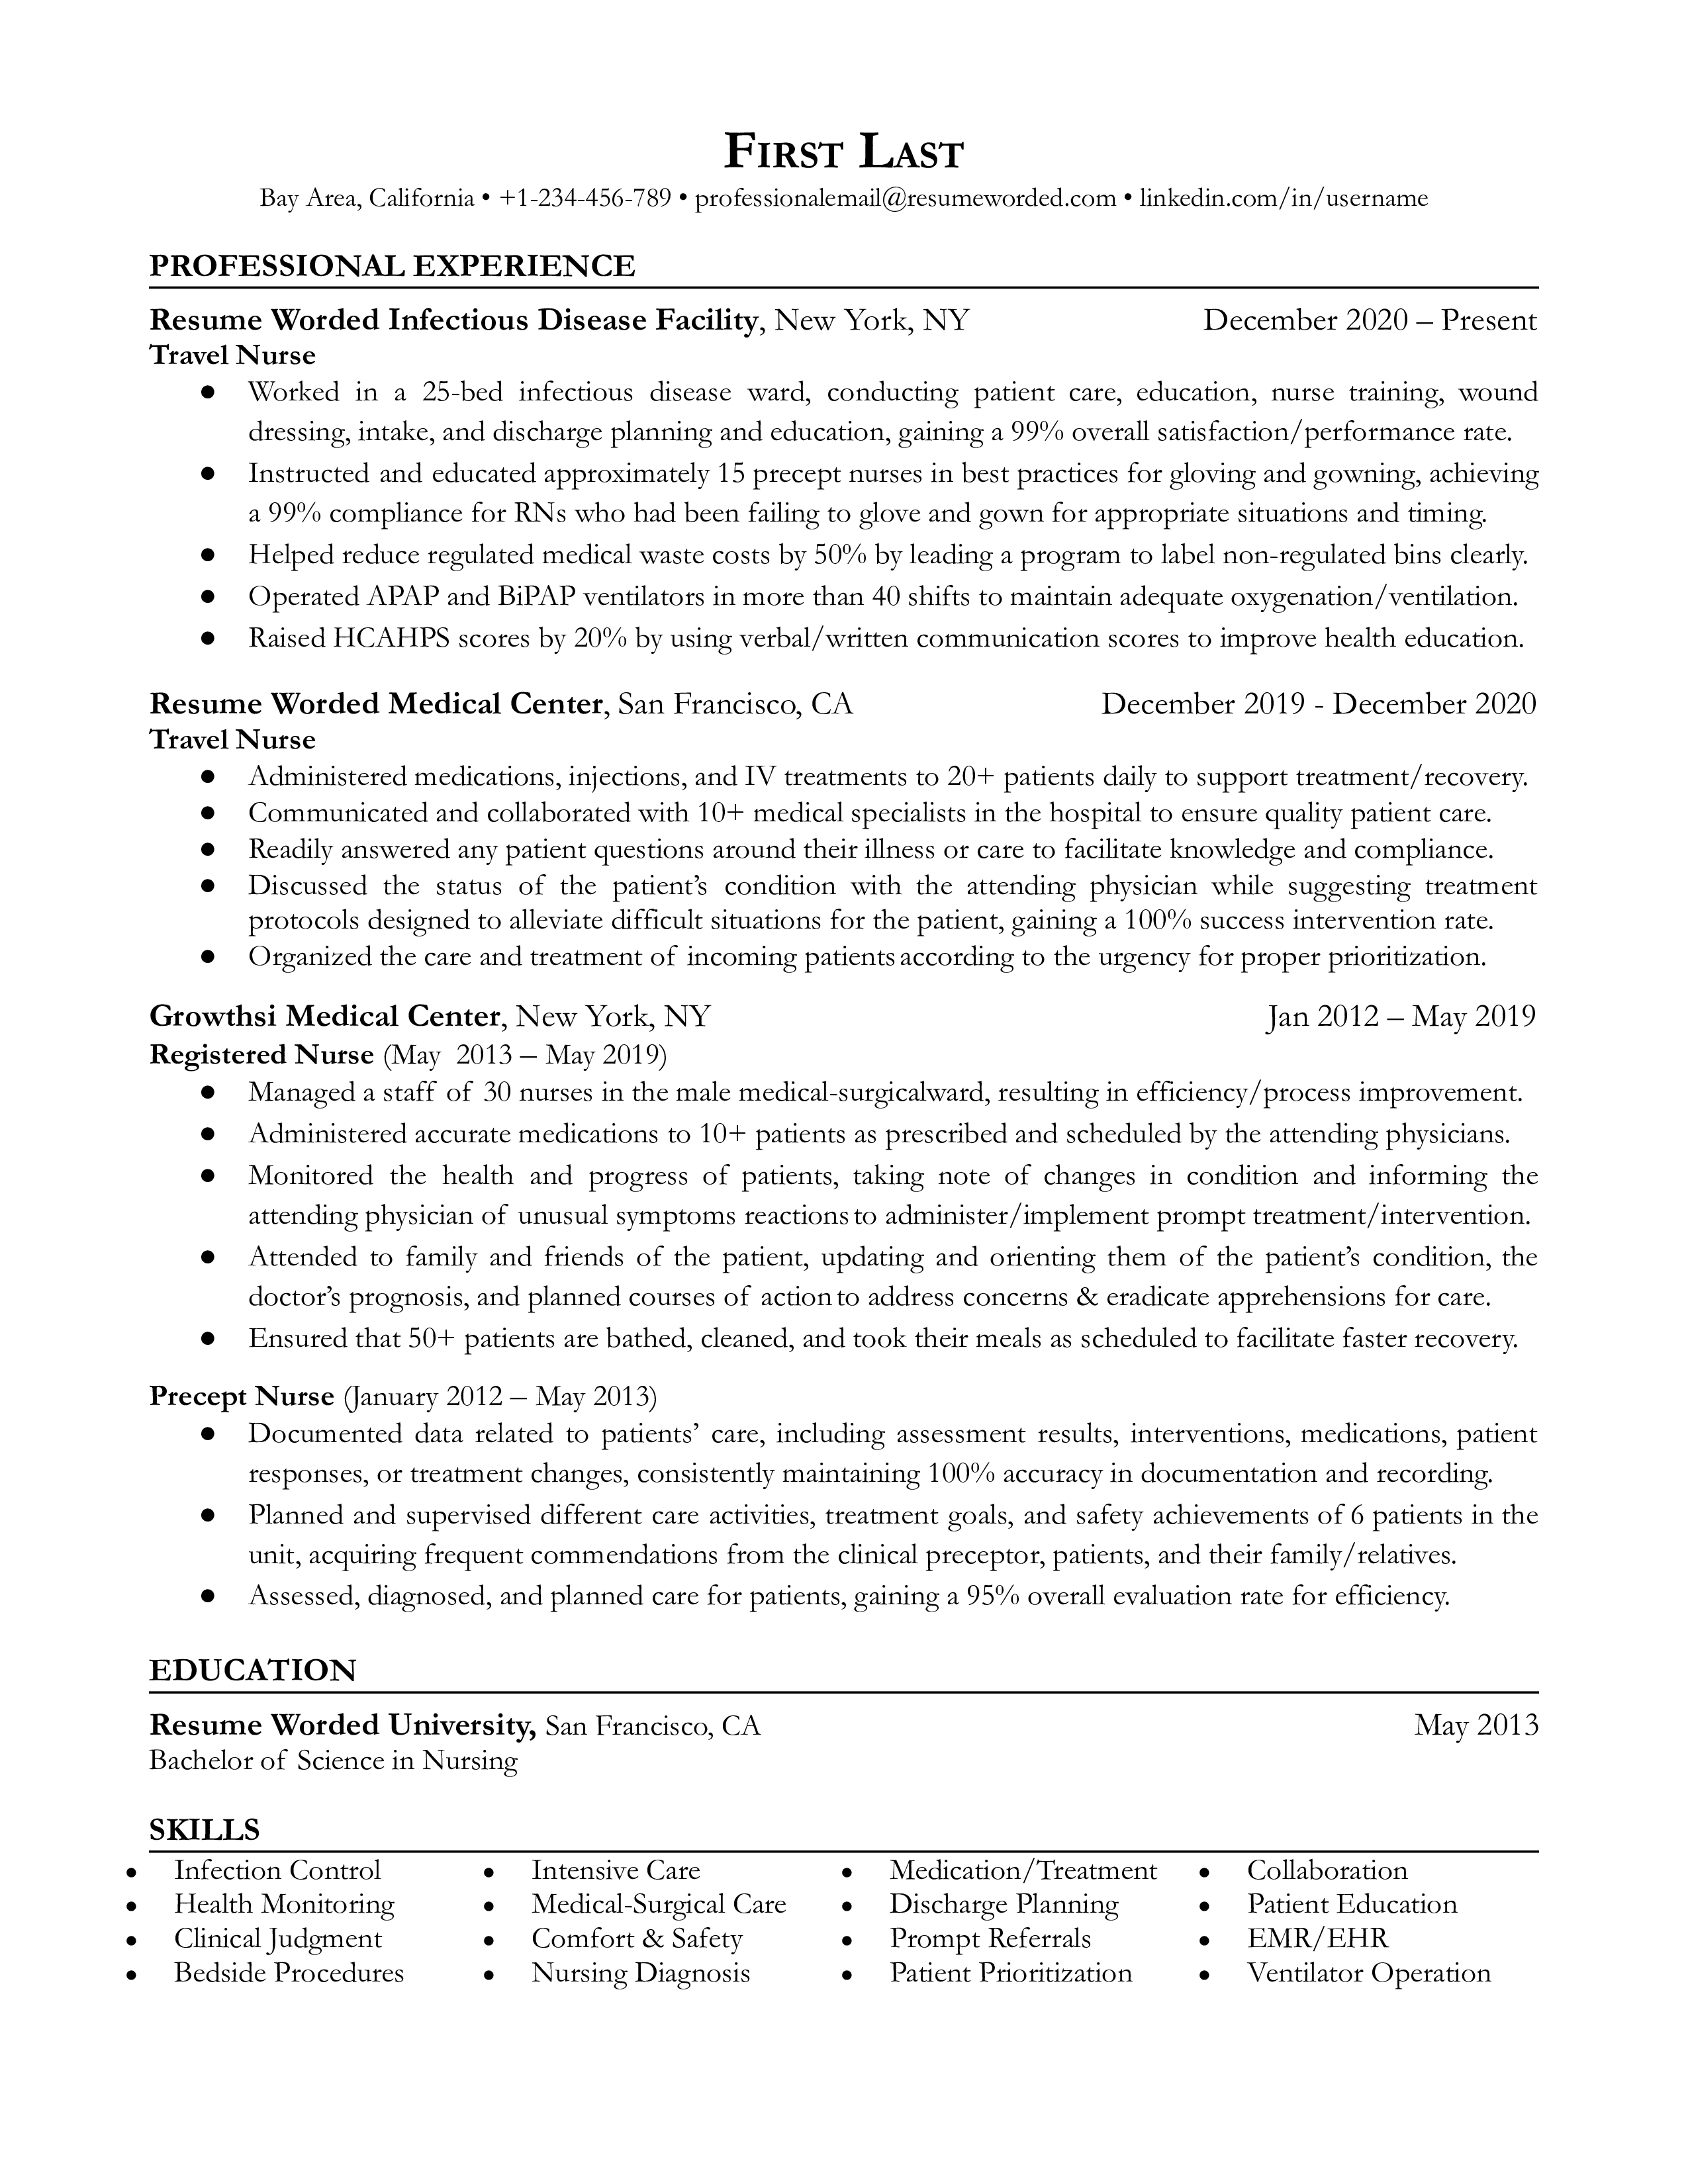 Director of Nursing Resume Example for 2023 Resume Worded